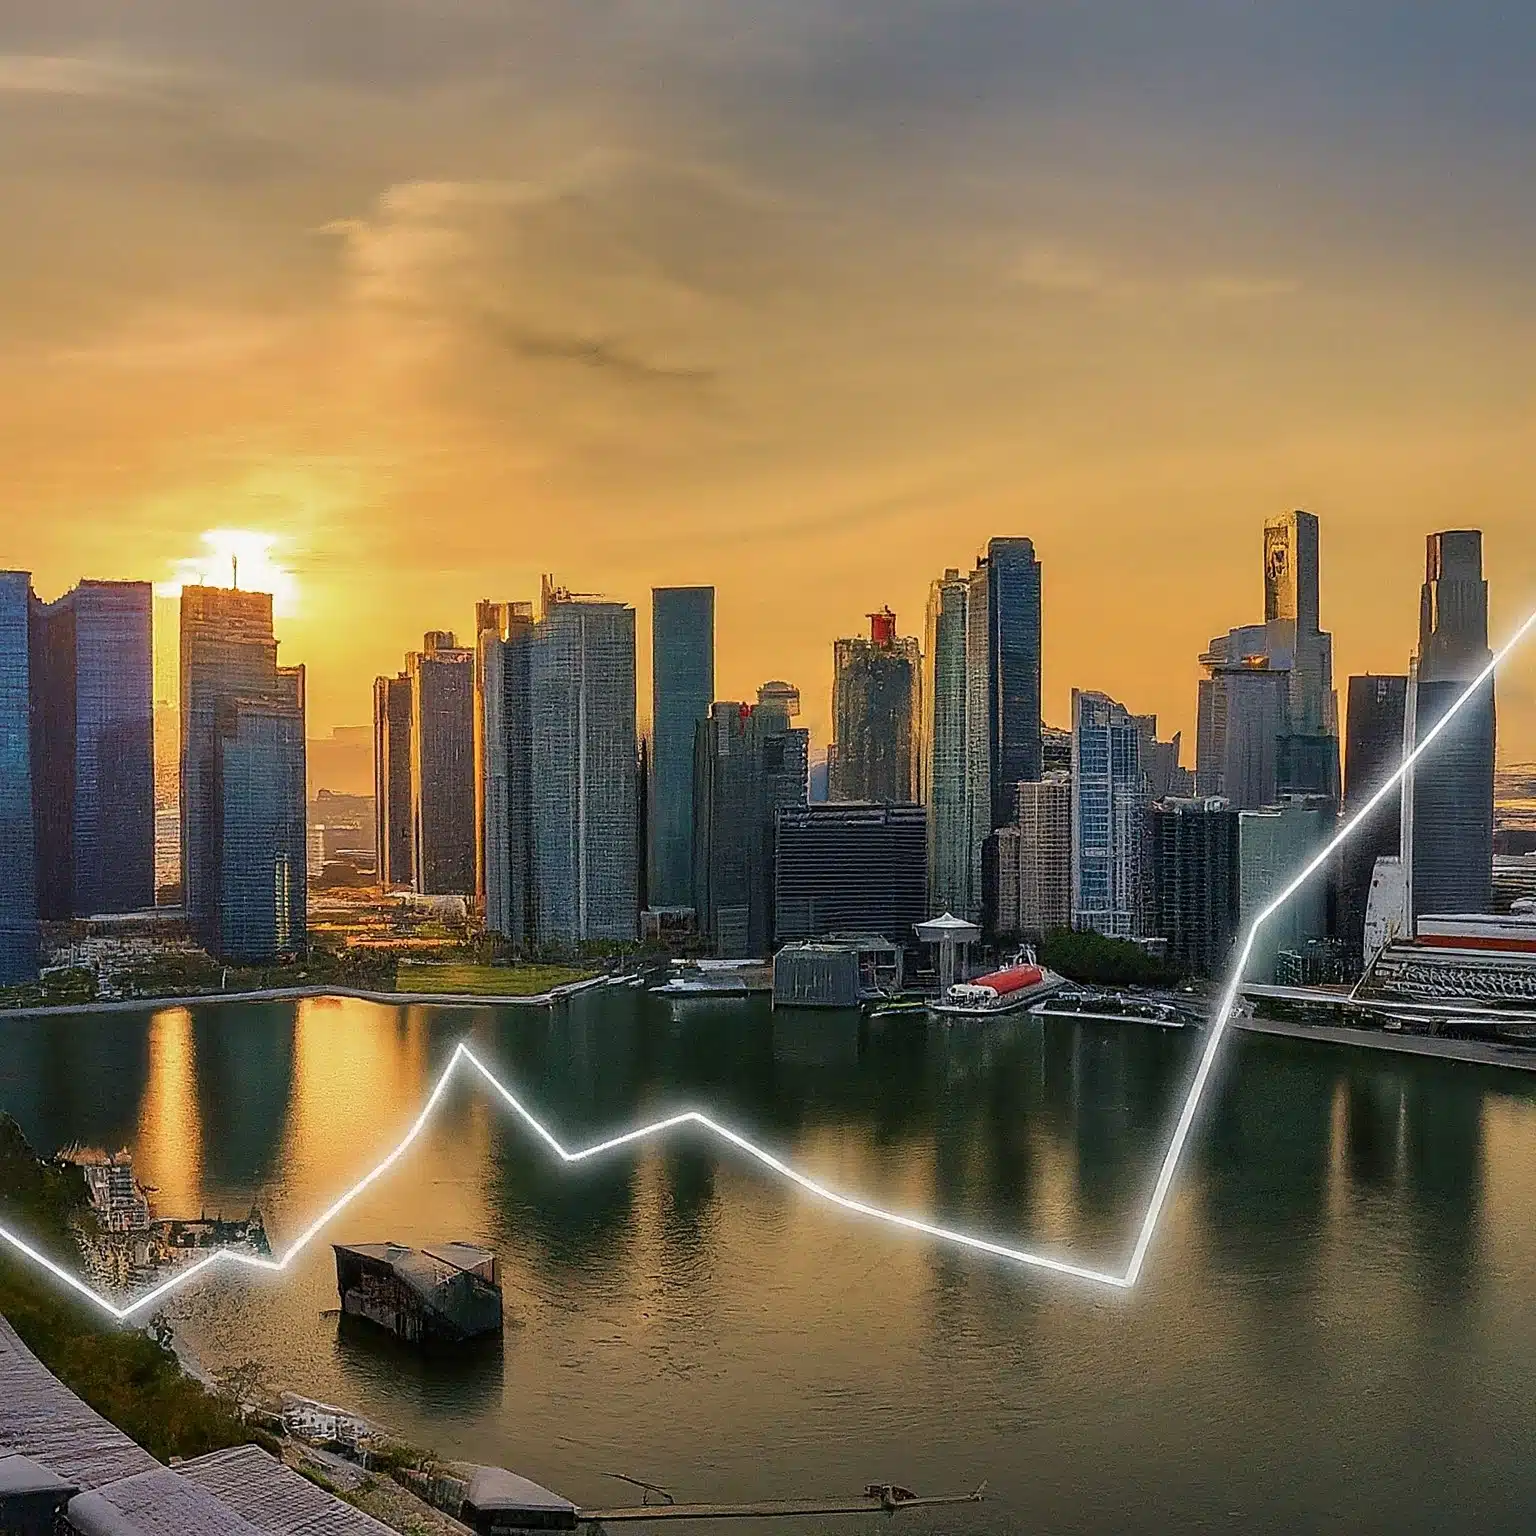 Shariah-compliant ETFs Investment Options for Muslim Investors in Singapore